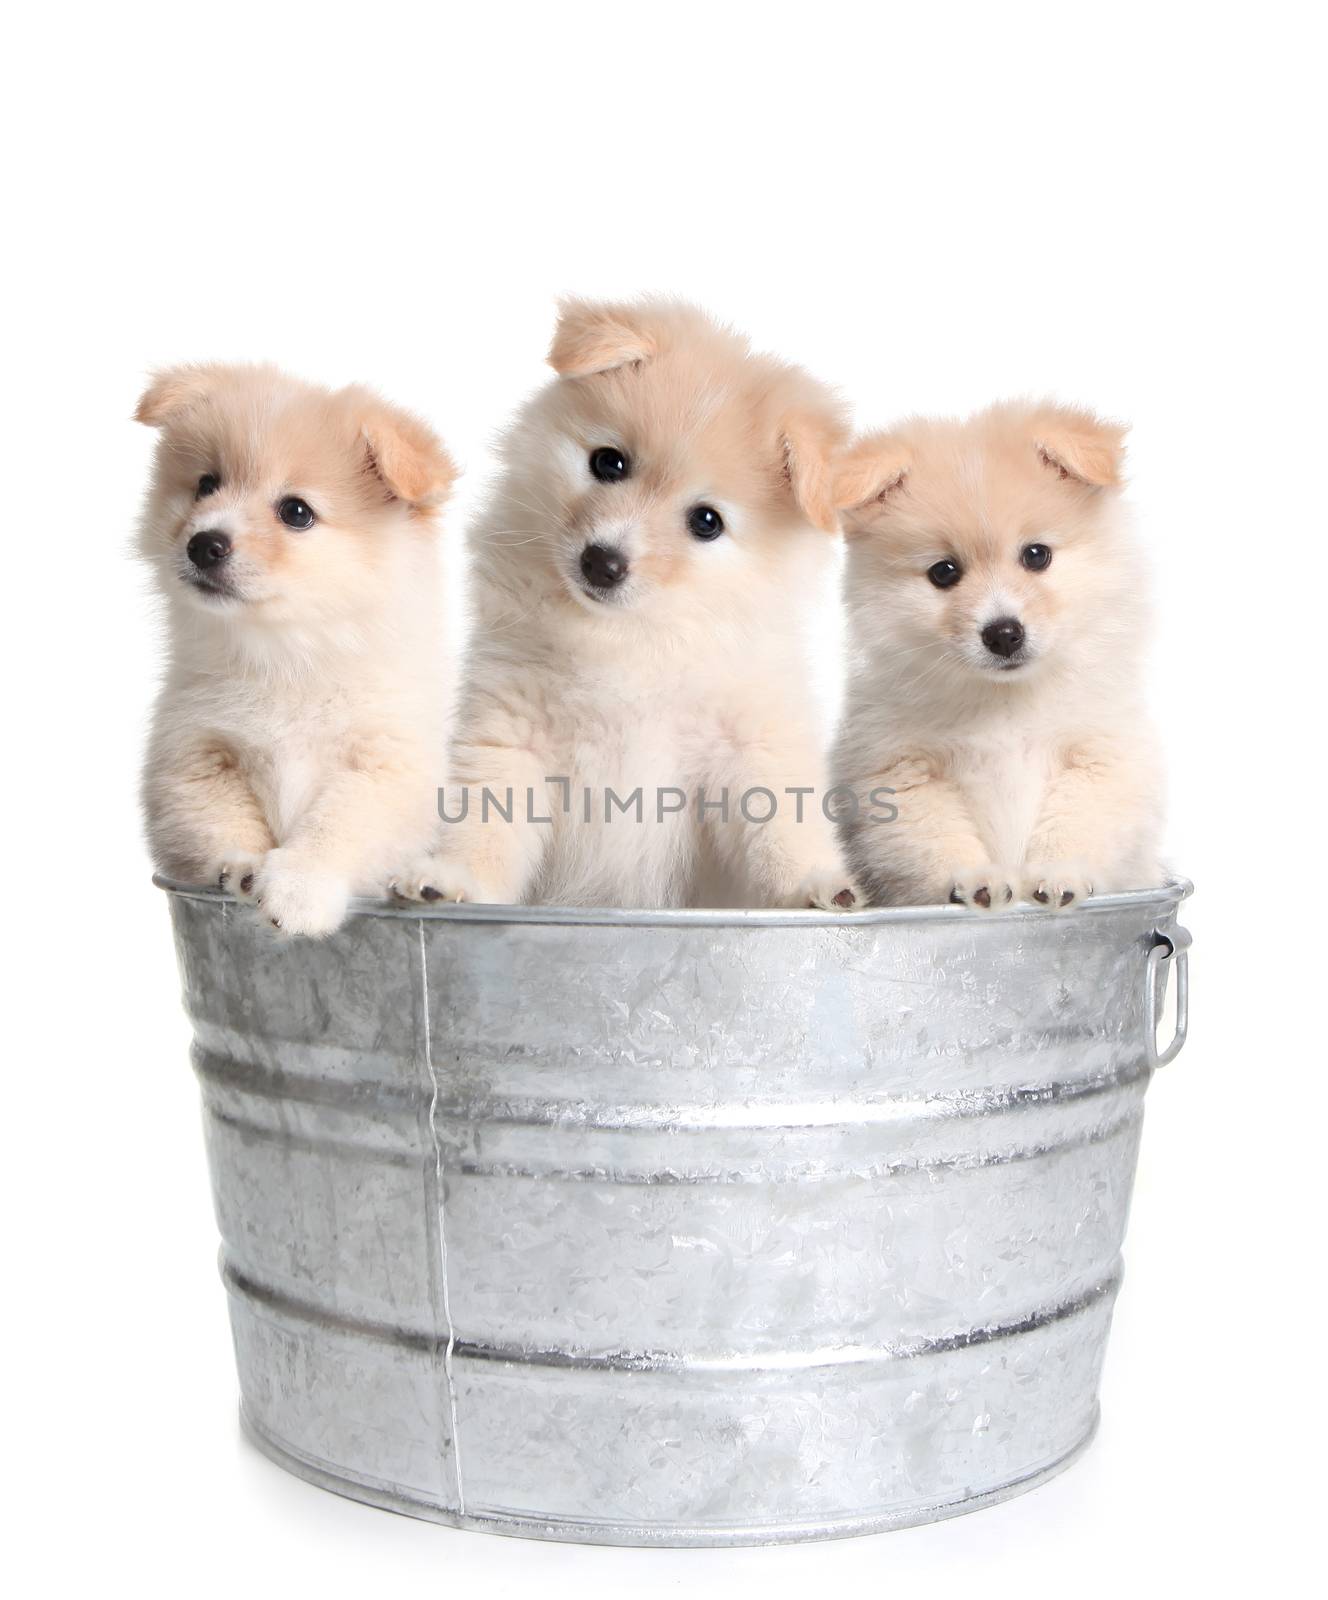 Puppies in an Old Silver Washtub  by tobkatrina